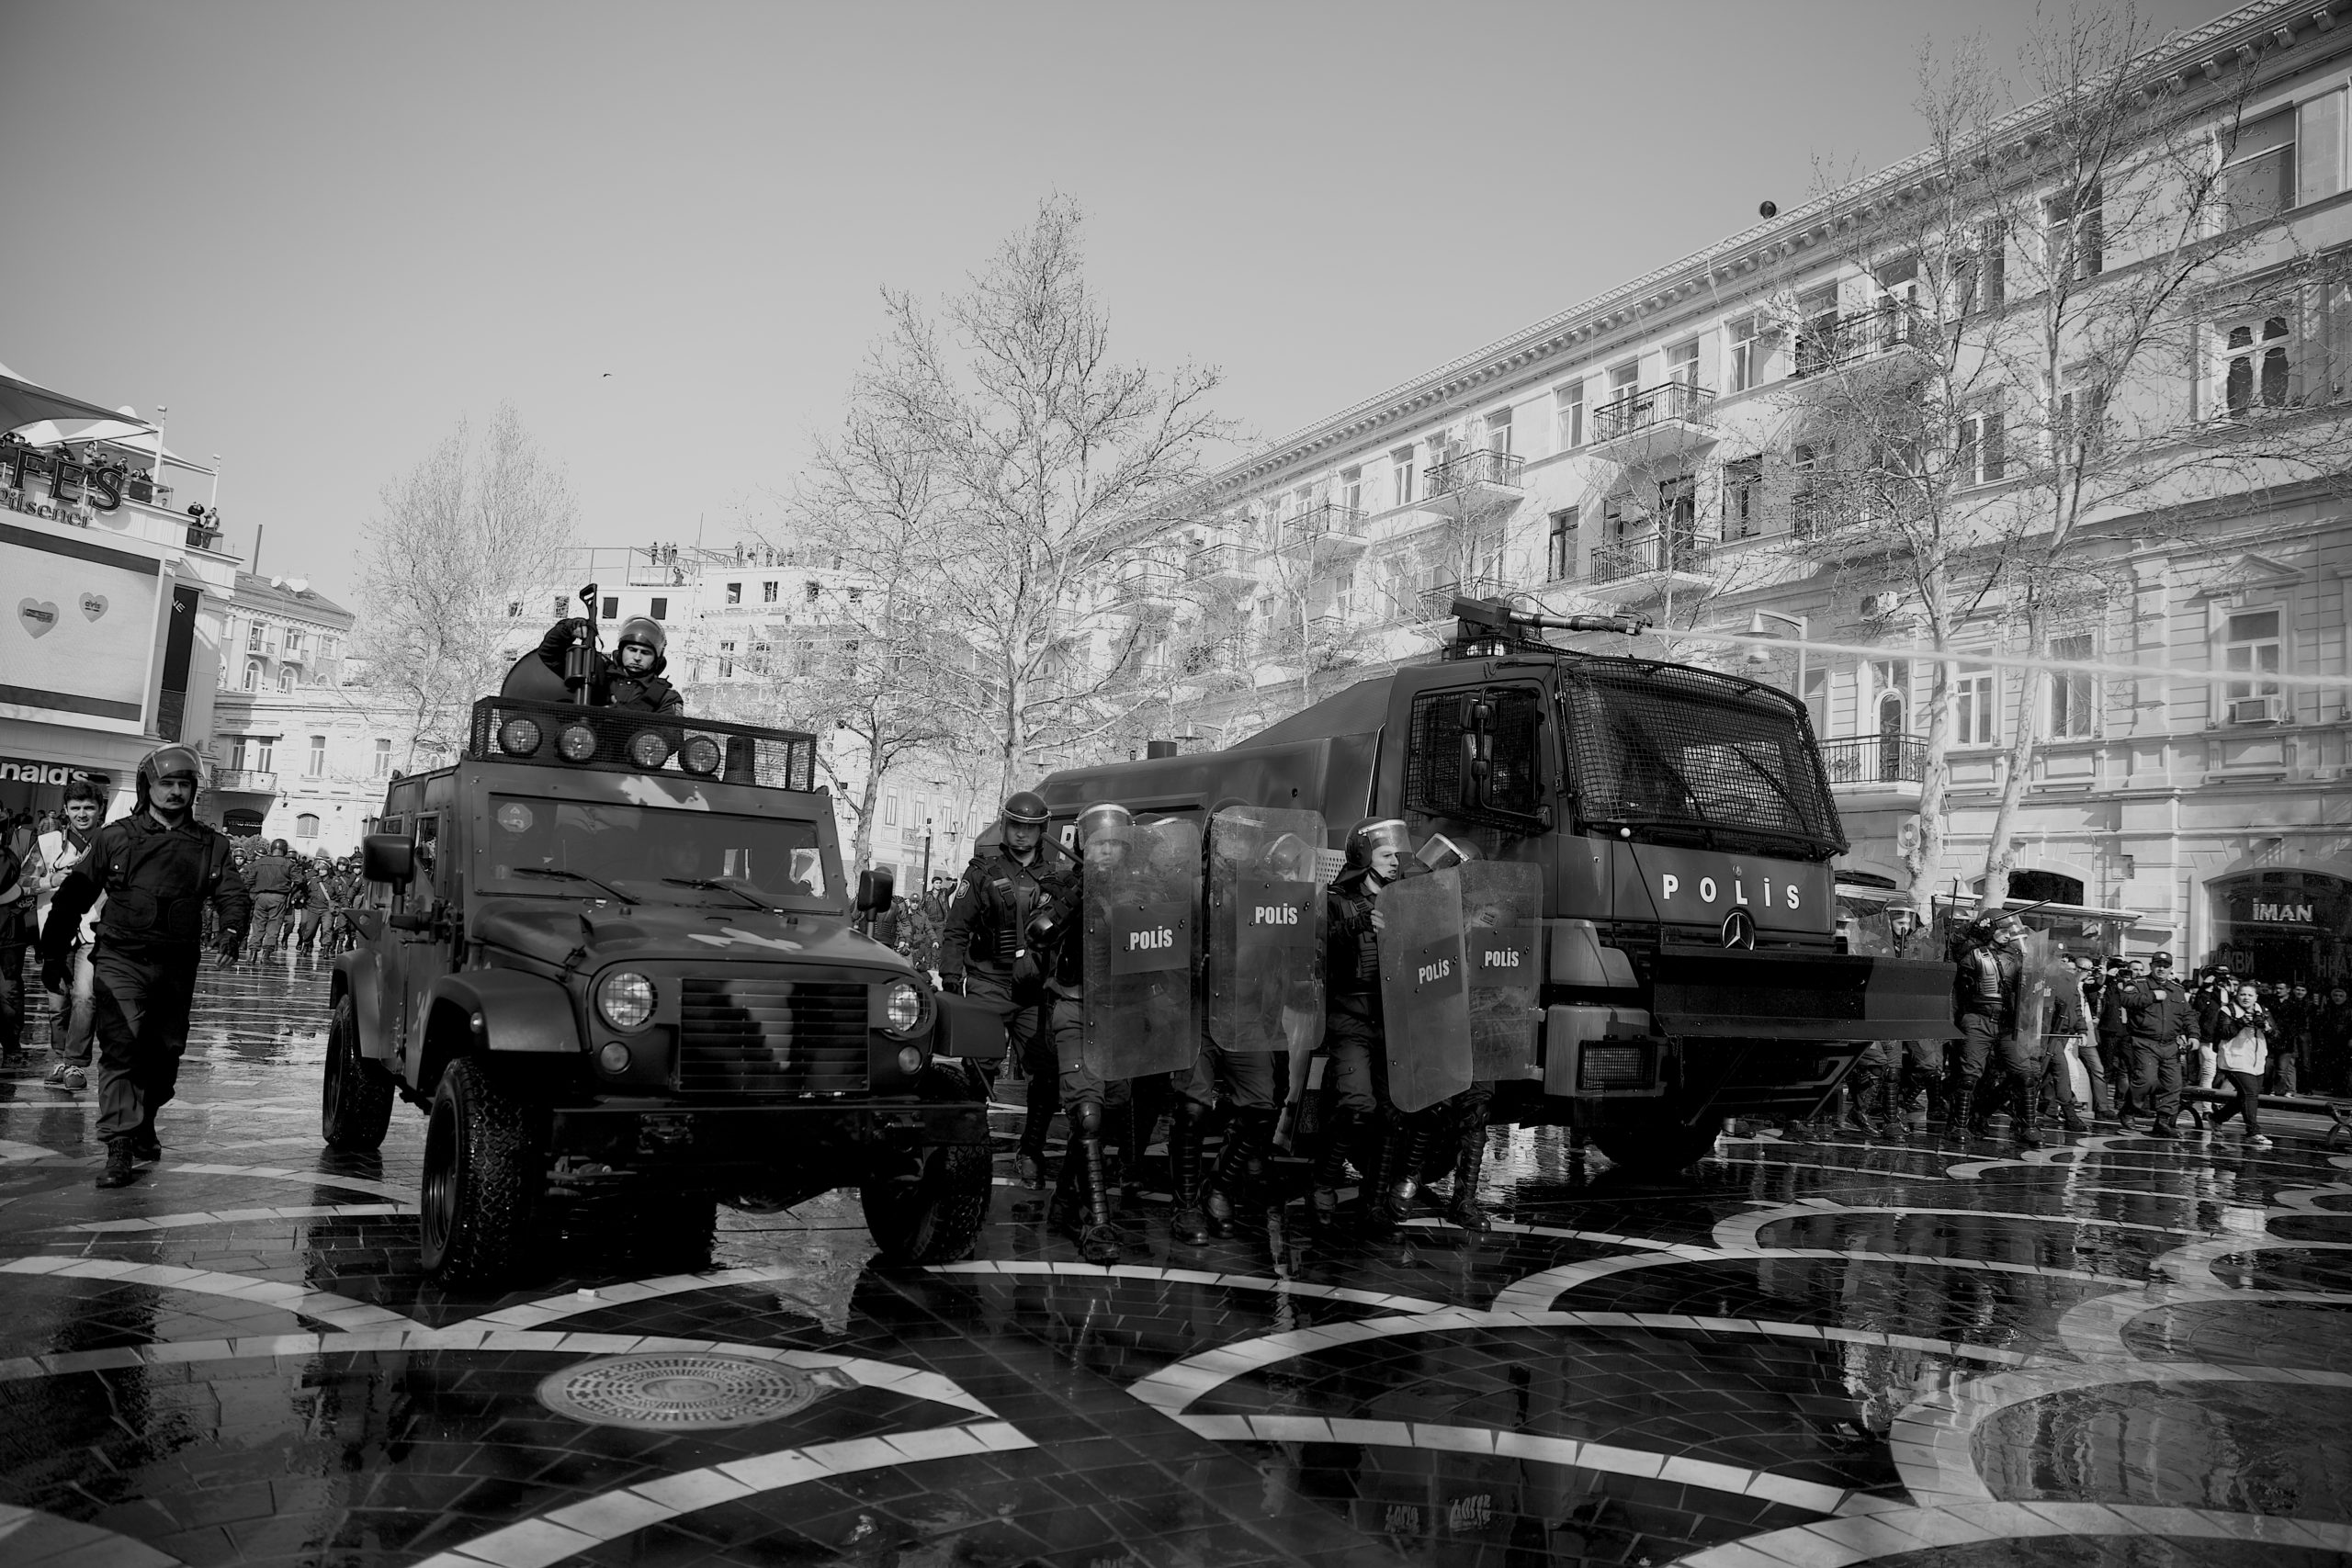 The protest was broken up with water cannons and truncheons, Fountain Square, Baku, March 2013